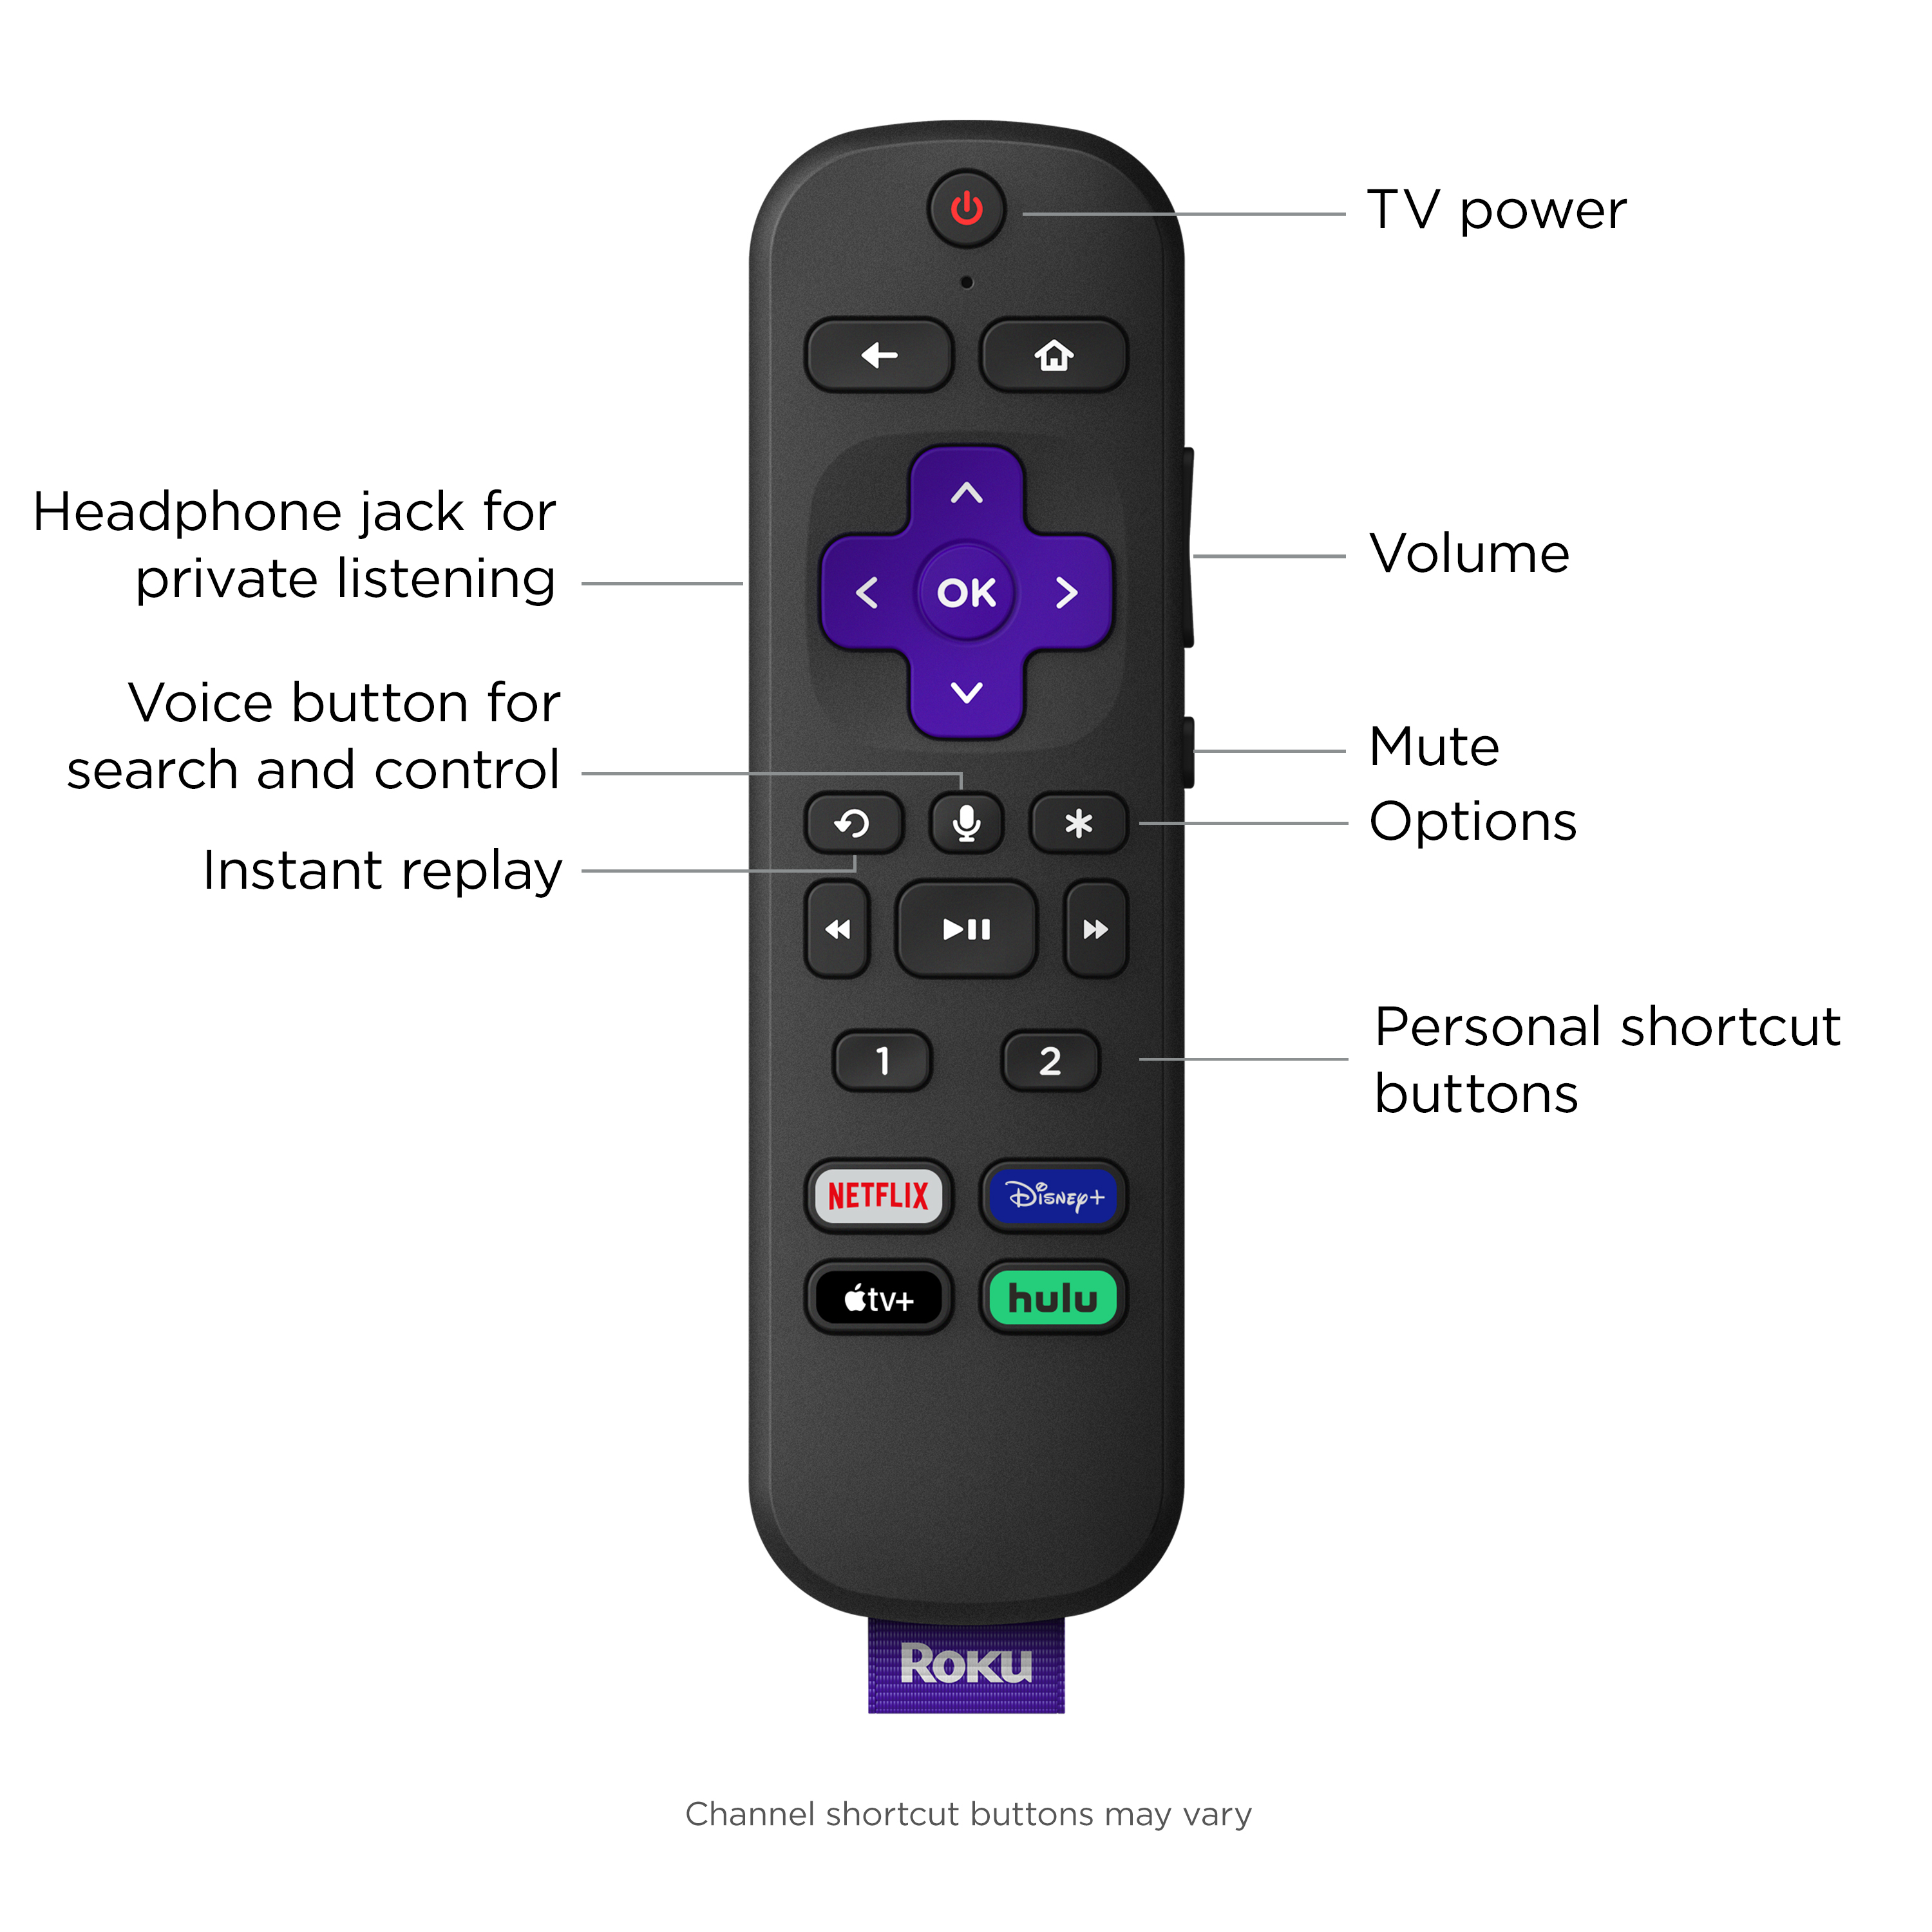 Roku Ultra | Streaming Device 4K/HDR/Dolby Vision, Roku Voice Remote with Headphone Jack, Premium HDMI® Cable - image 5 of 16